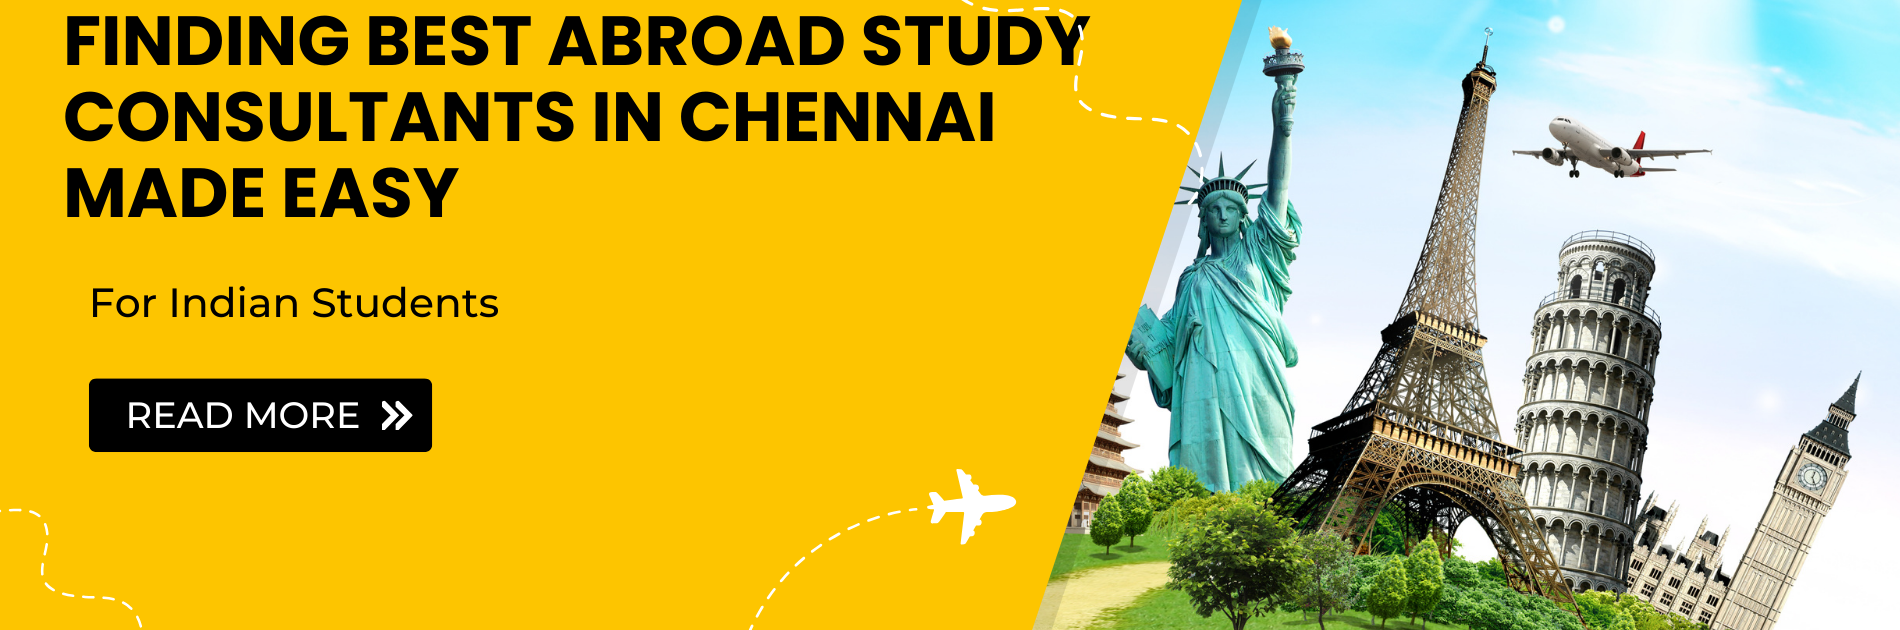 Best Abroad Study Consultants in Chennai